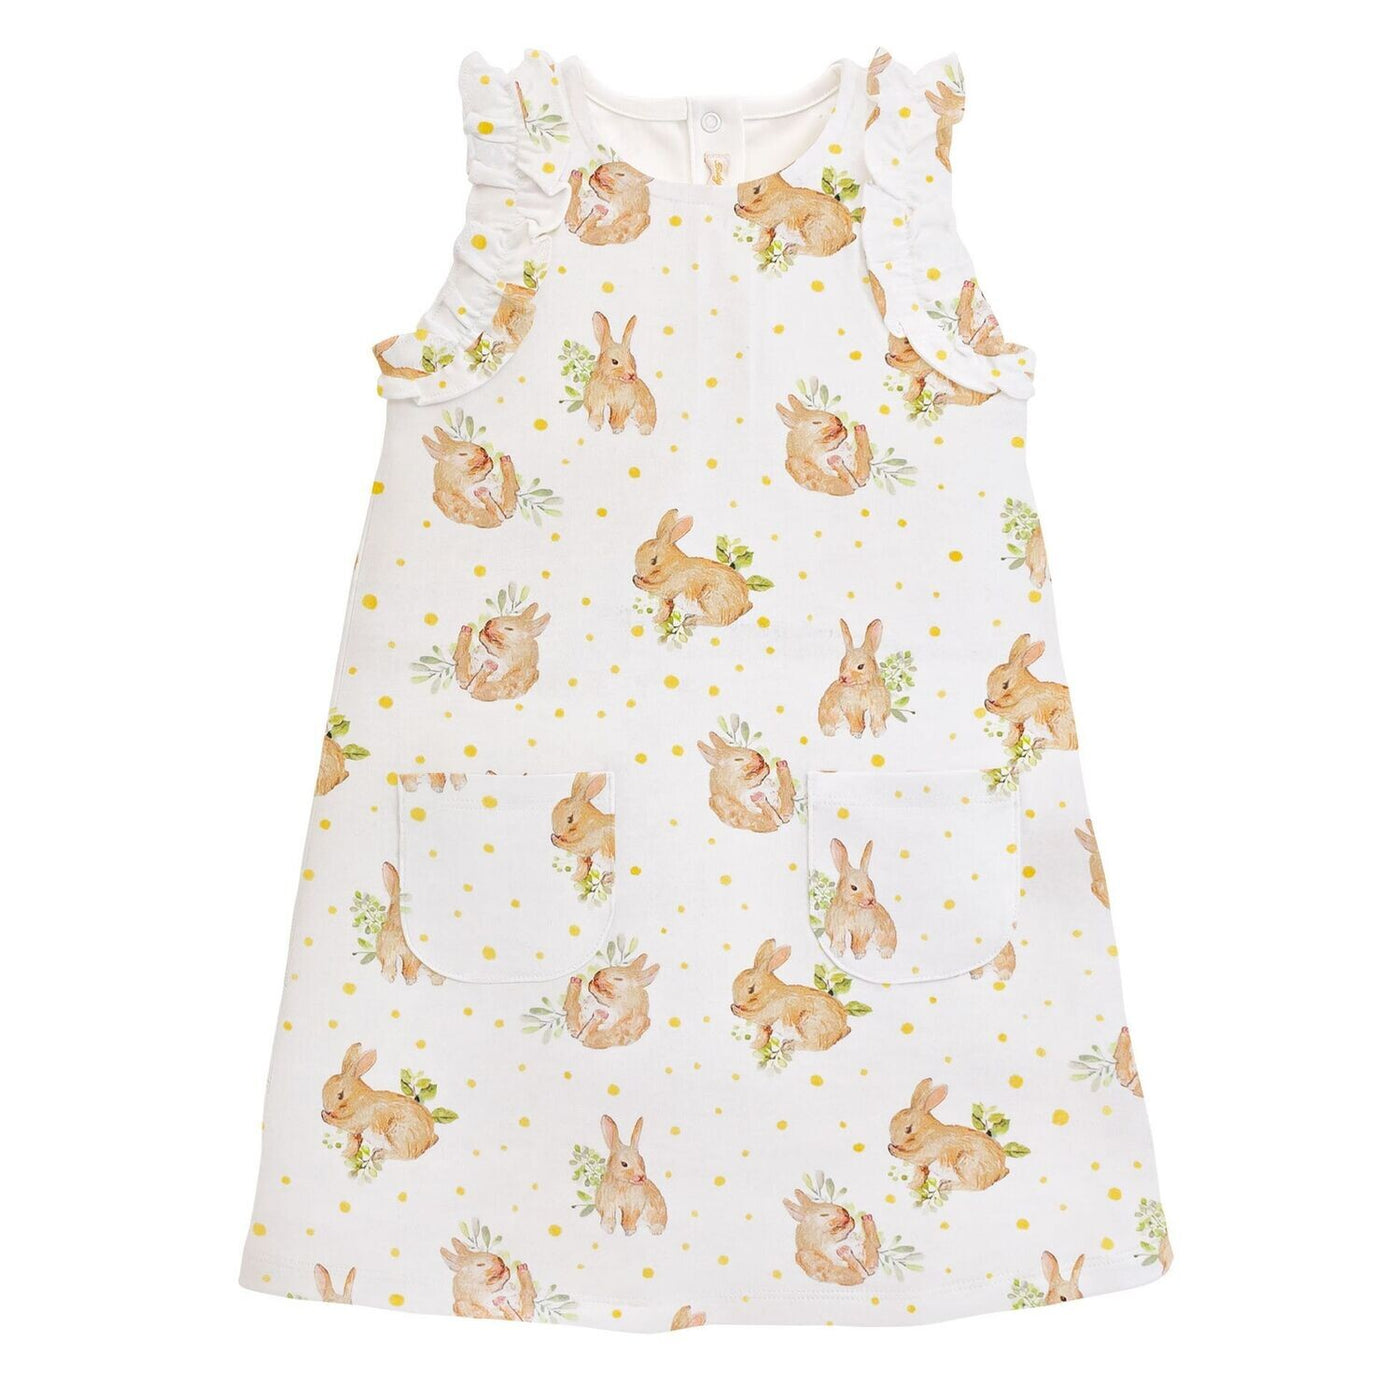 Adorable Bunnies Toddler Dress Baby Club Chic